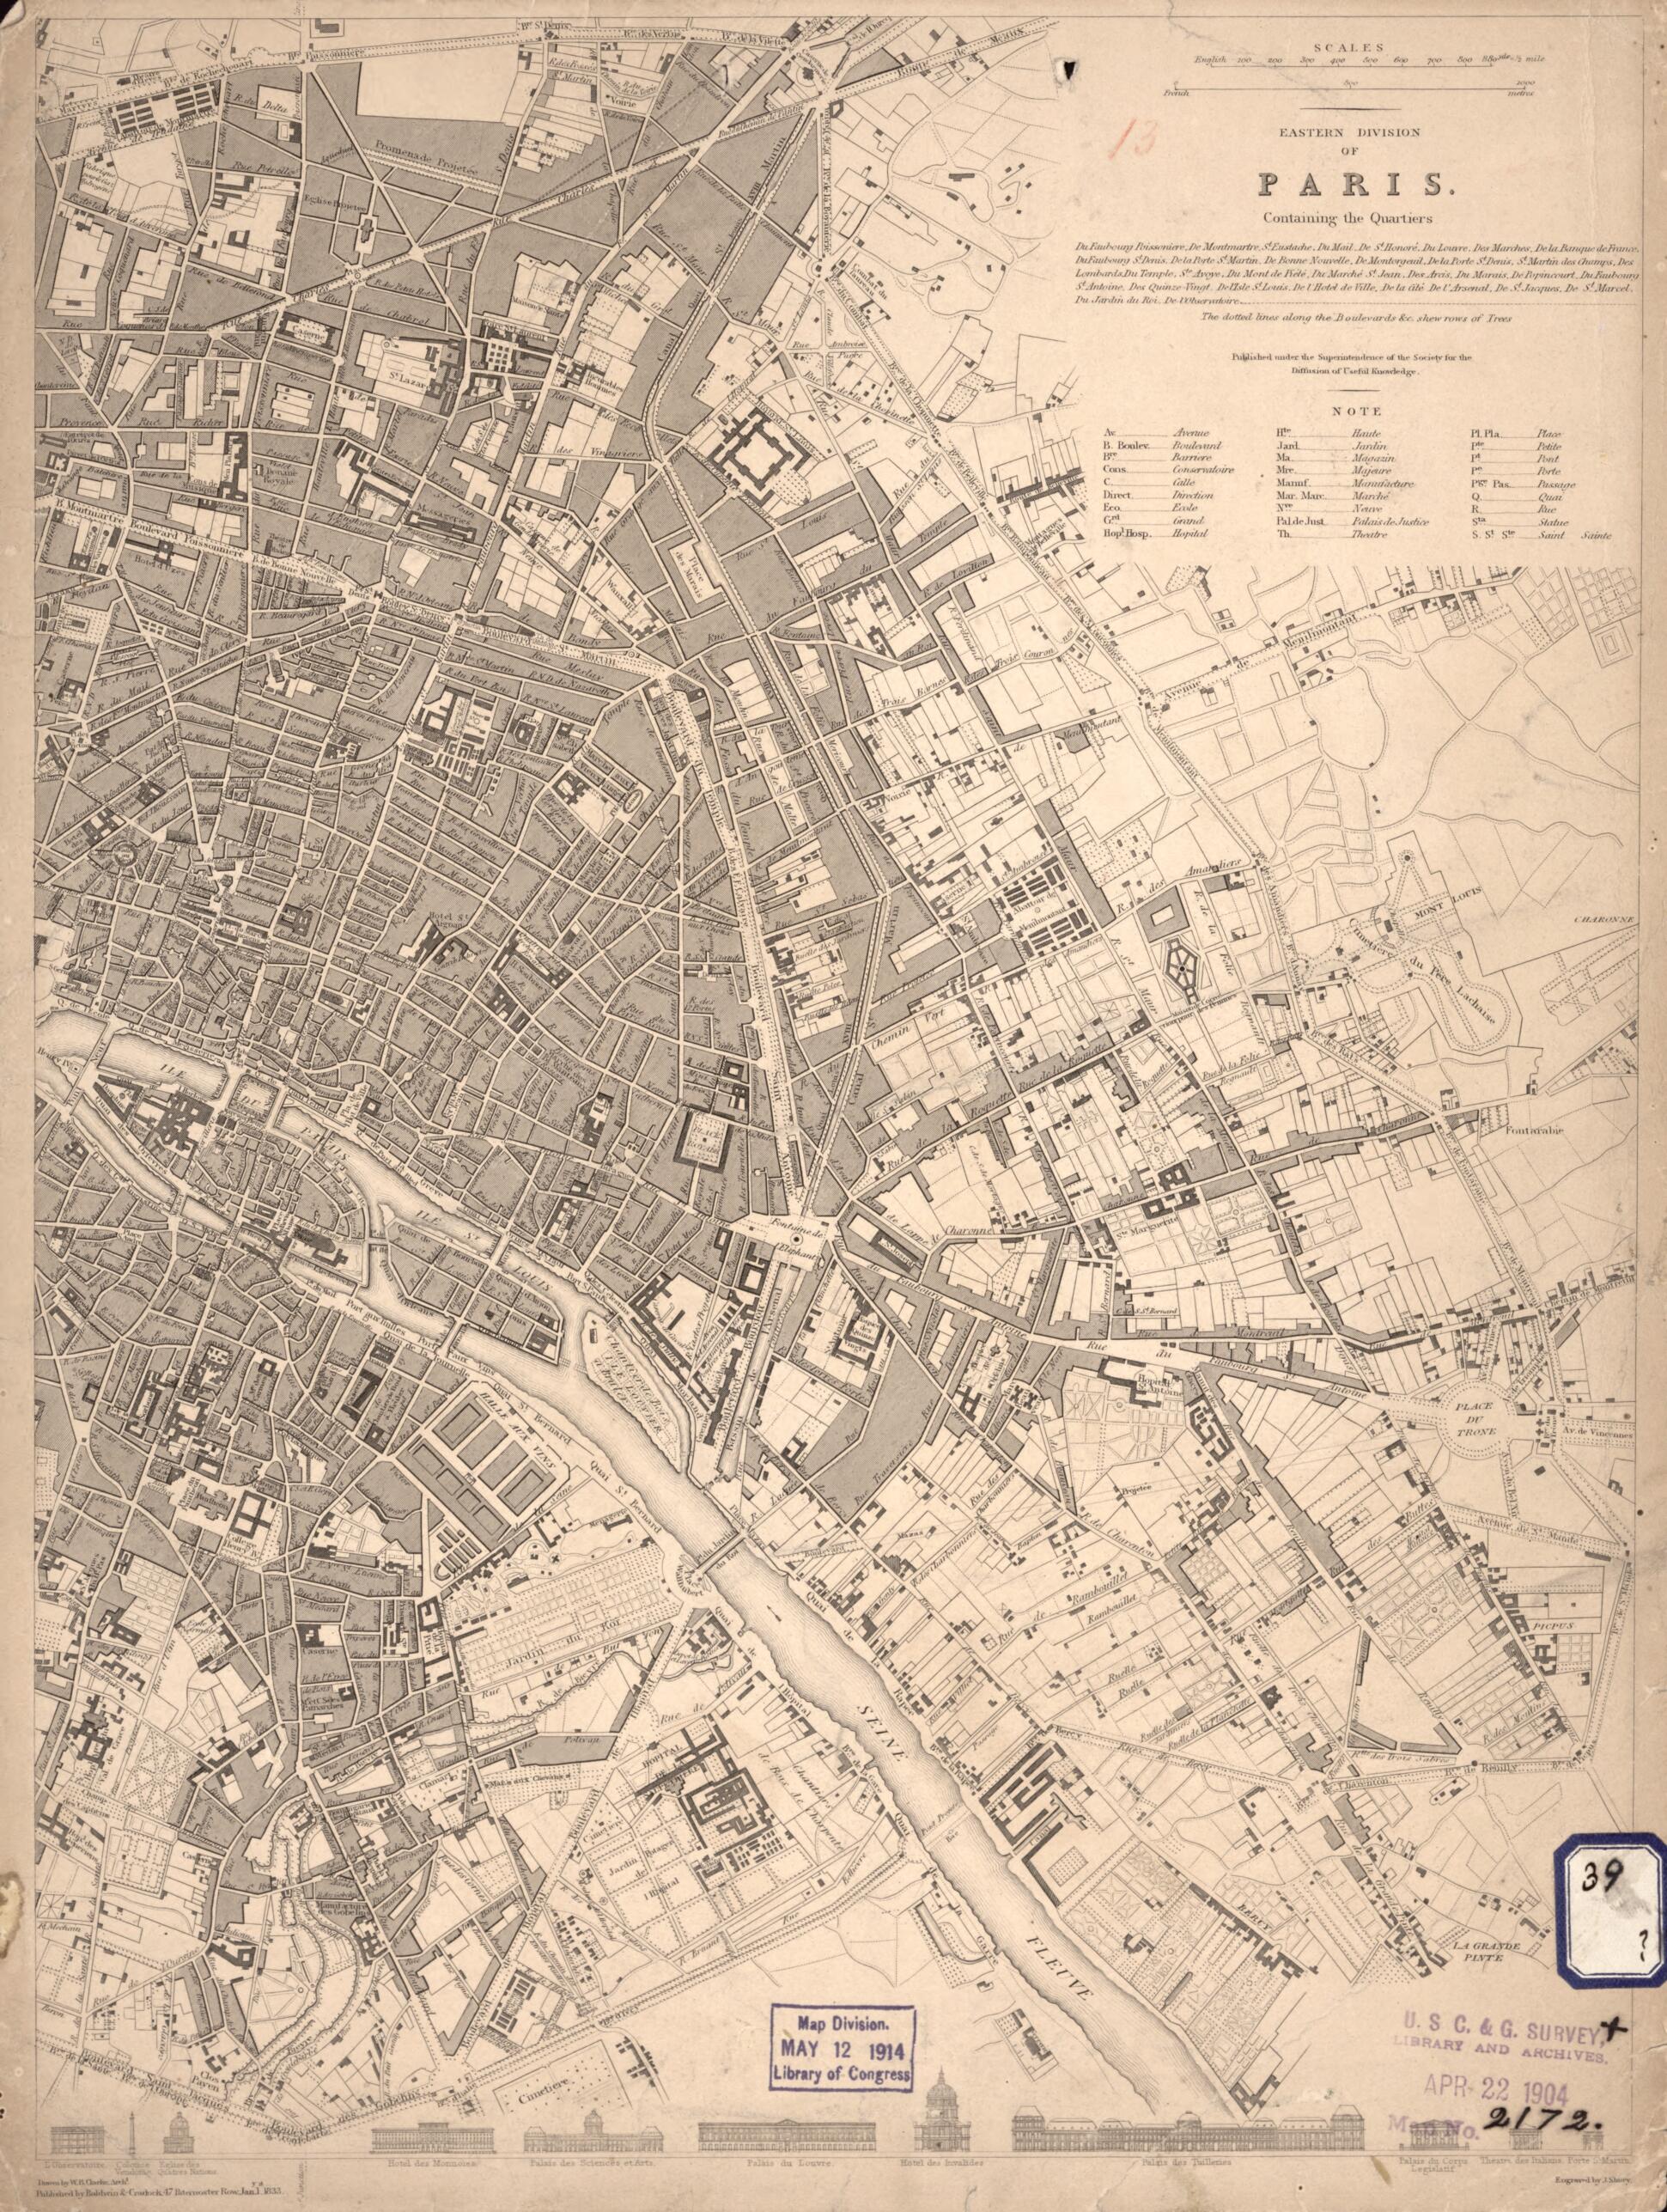 This old map of Eastern Division of Paris : Containing the Quartiers from 1833 was created by W. B. Clarke, James Shury,  Society for the Diffusion of Useful Knowledge (Great Britain) in 1833